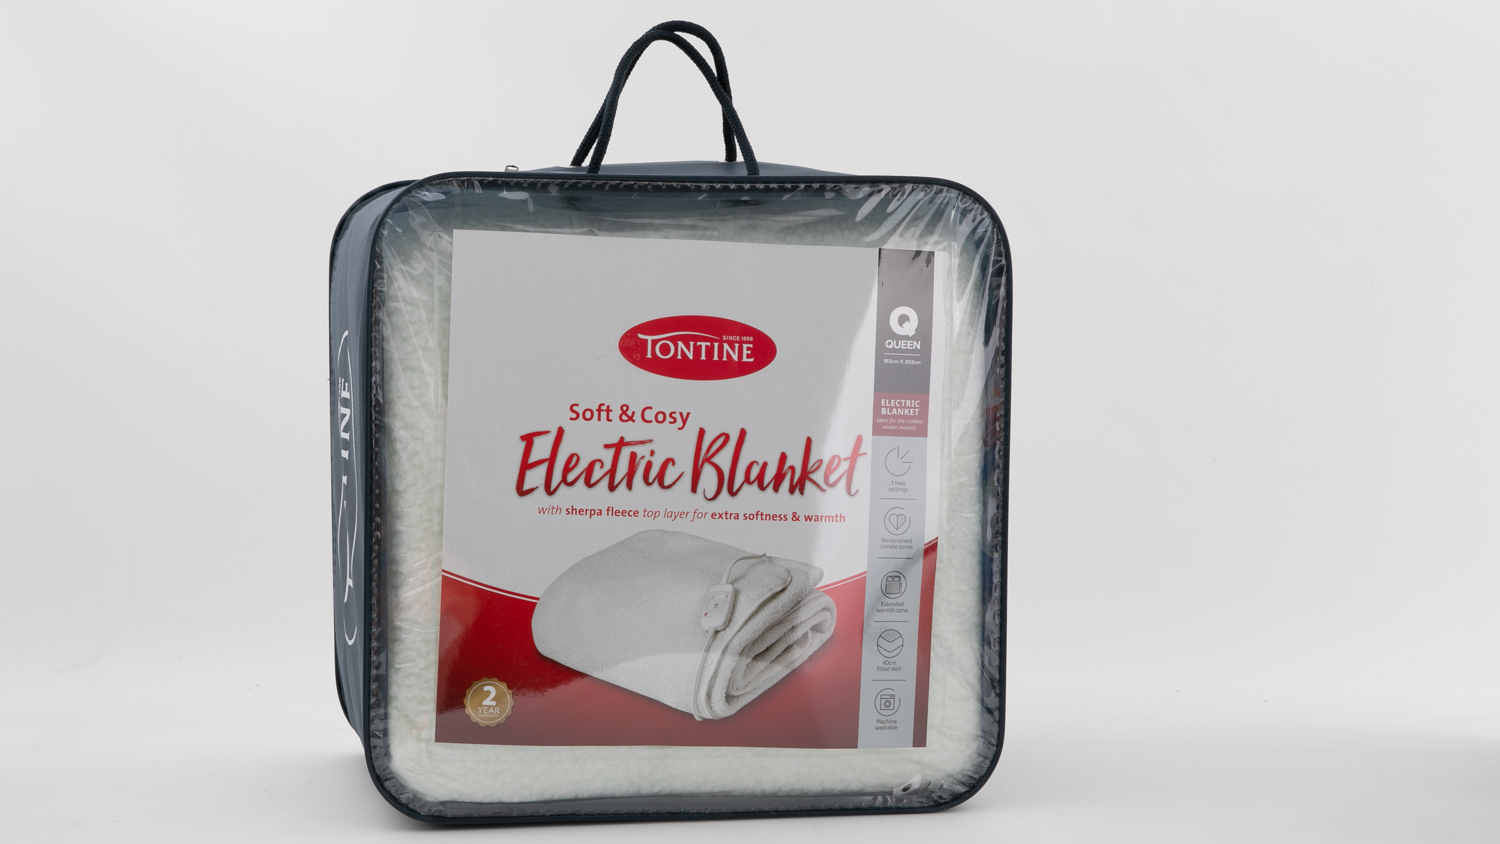 Tontine Soft & Cosy Electric Blanket with Sherpa Fleece Top Layer for Extra Softness & Warmth TEB2035QB carousel image